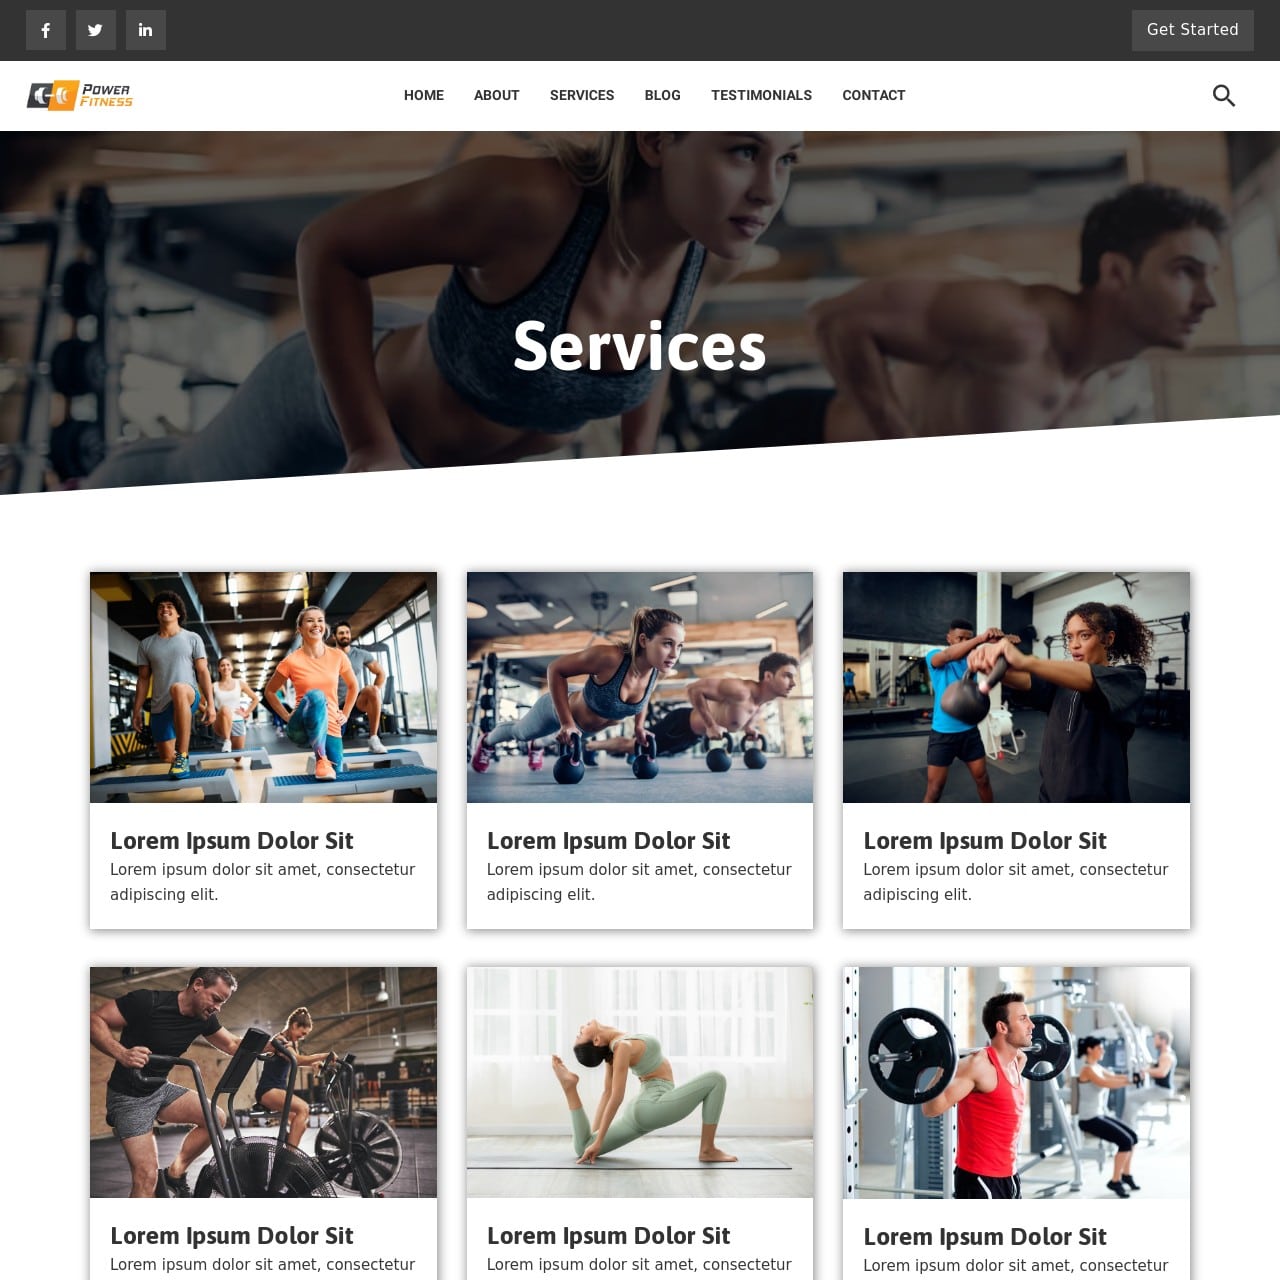 Gym & Fitness Template - Services Page